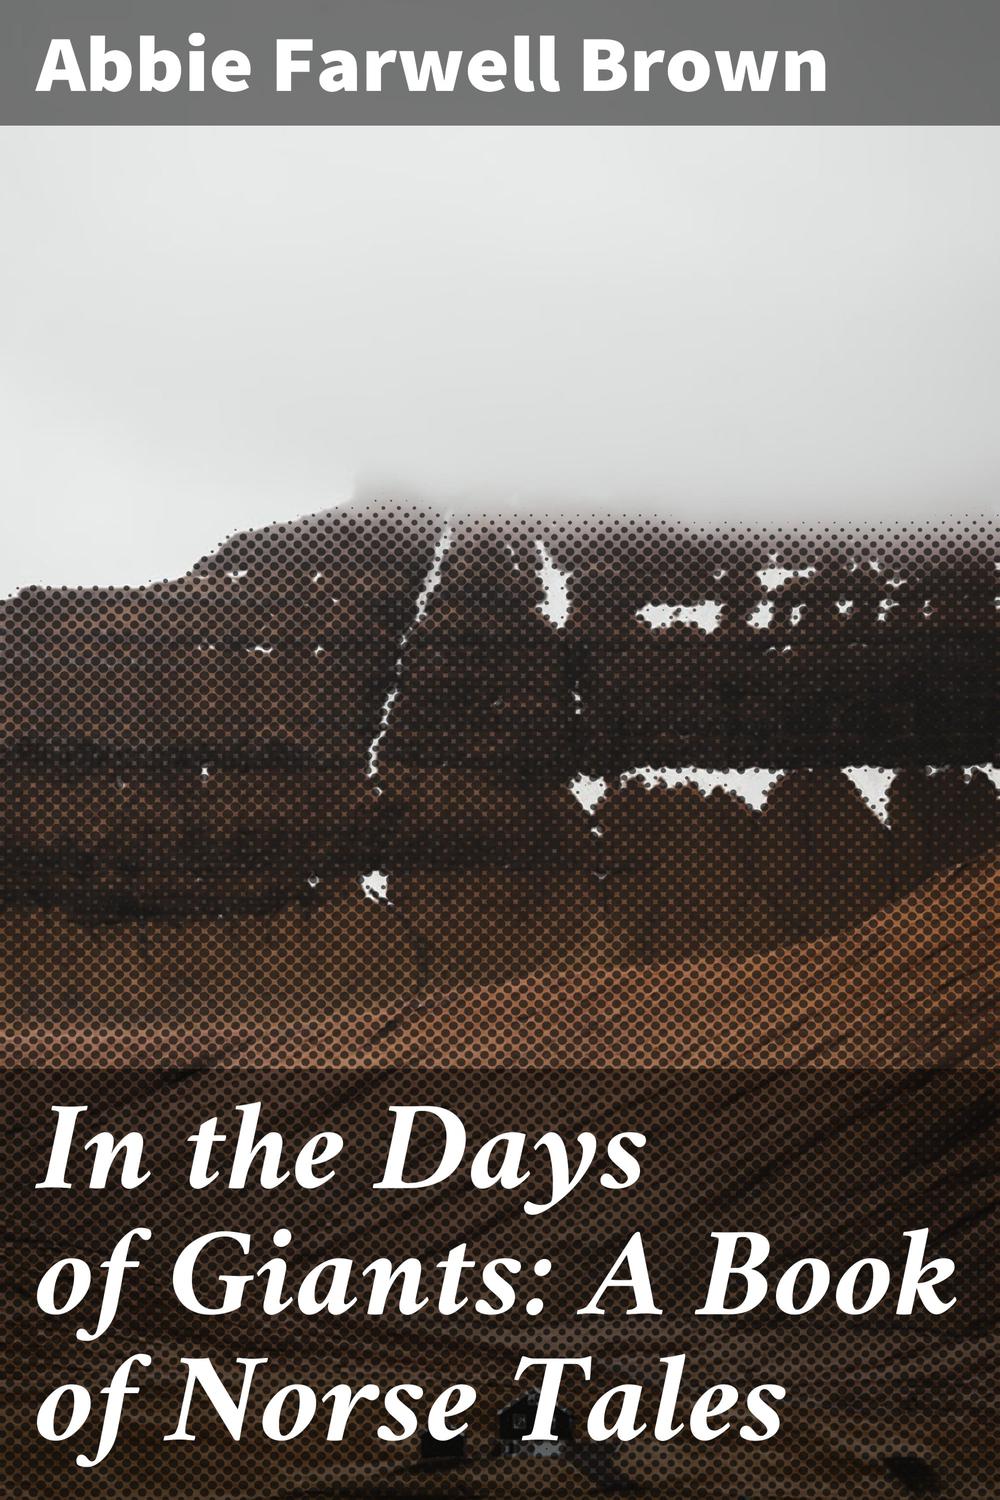 In the Days of Giants: A Book of Norse Tales - Abbie Farwell Brown